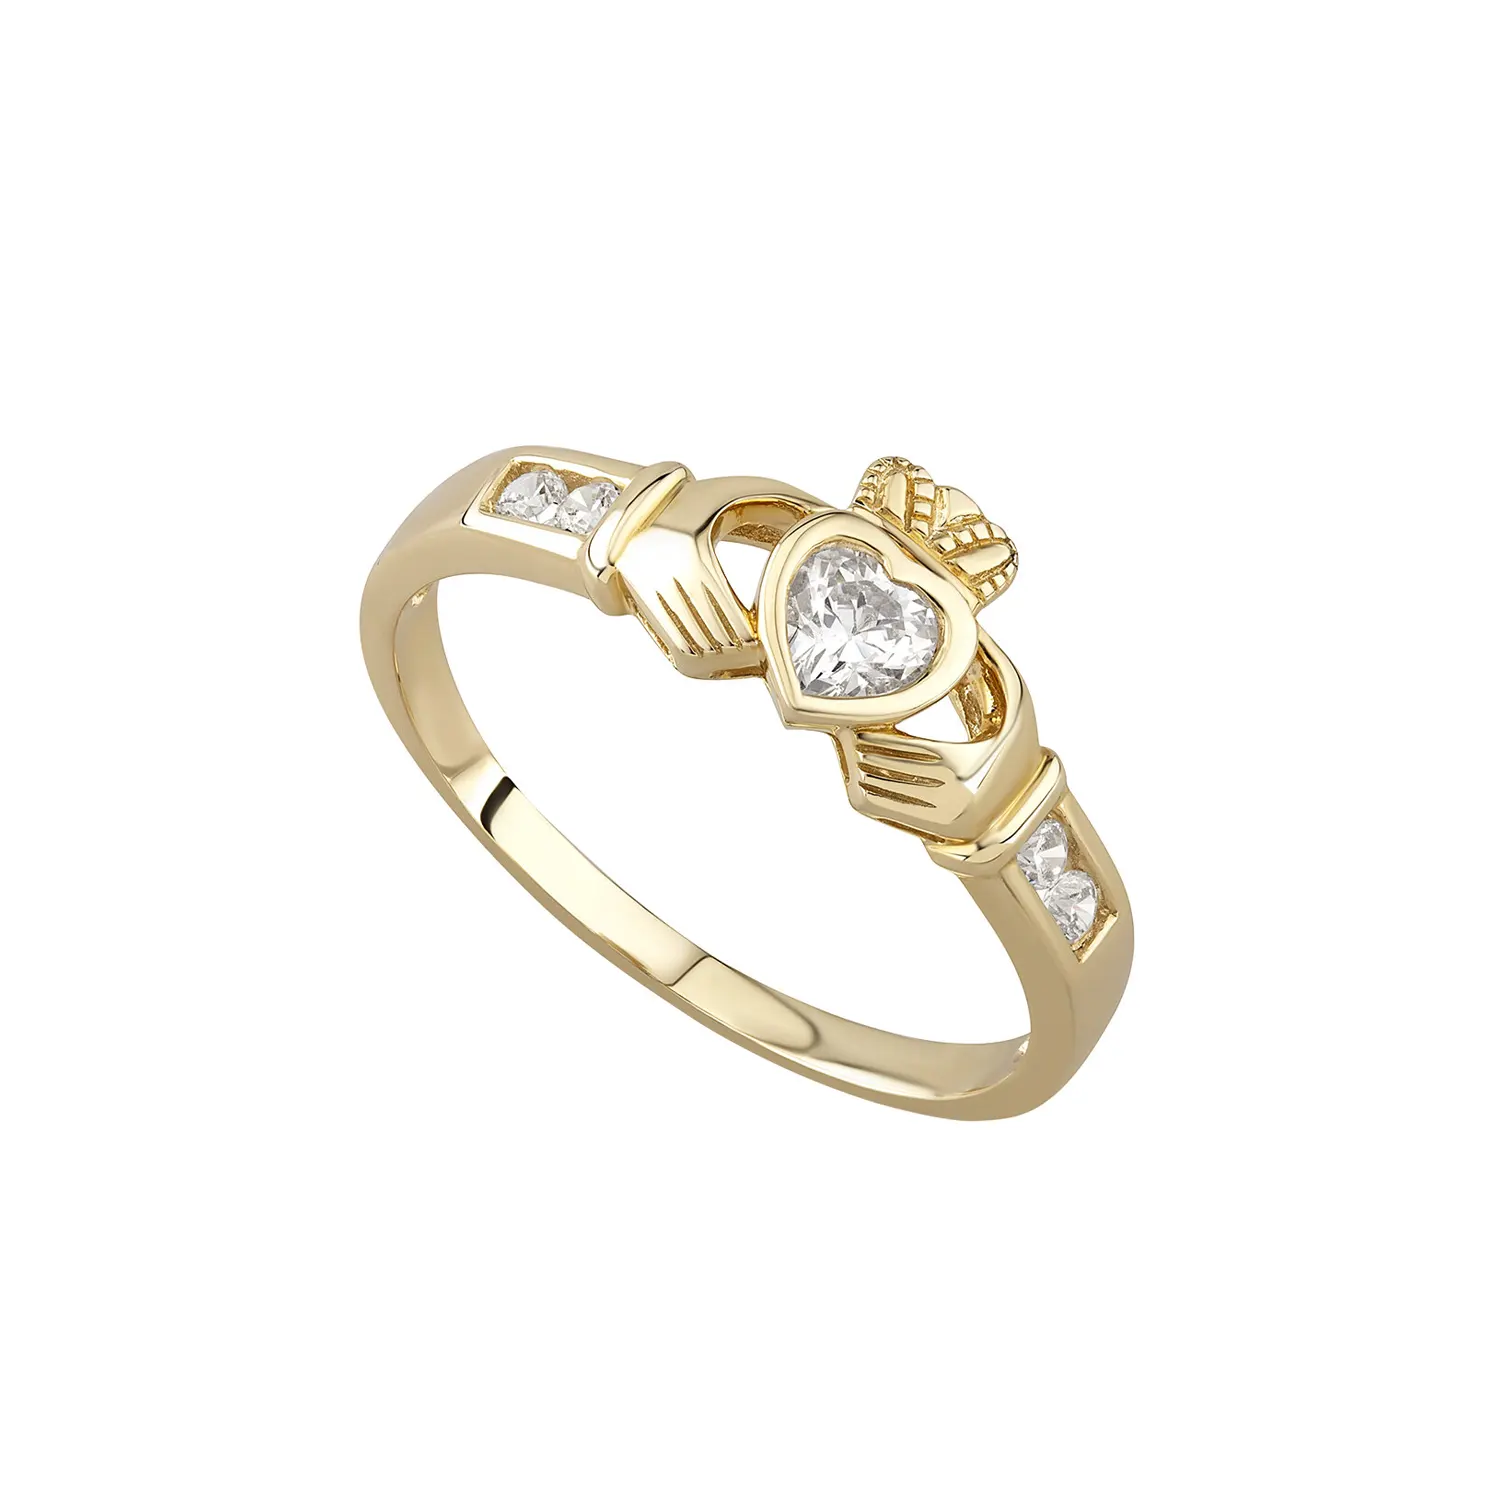 9ct. Yellow Gold & CZ Claddagh Ring